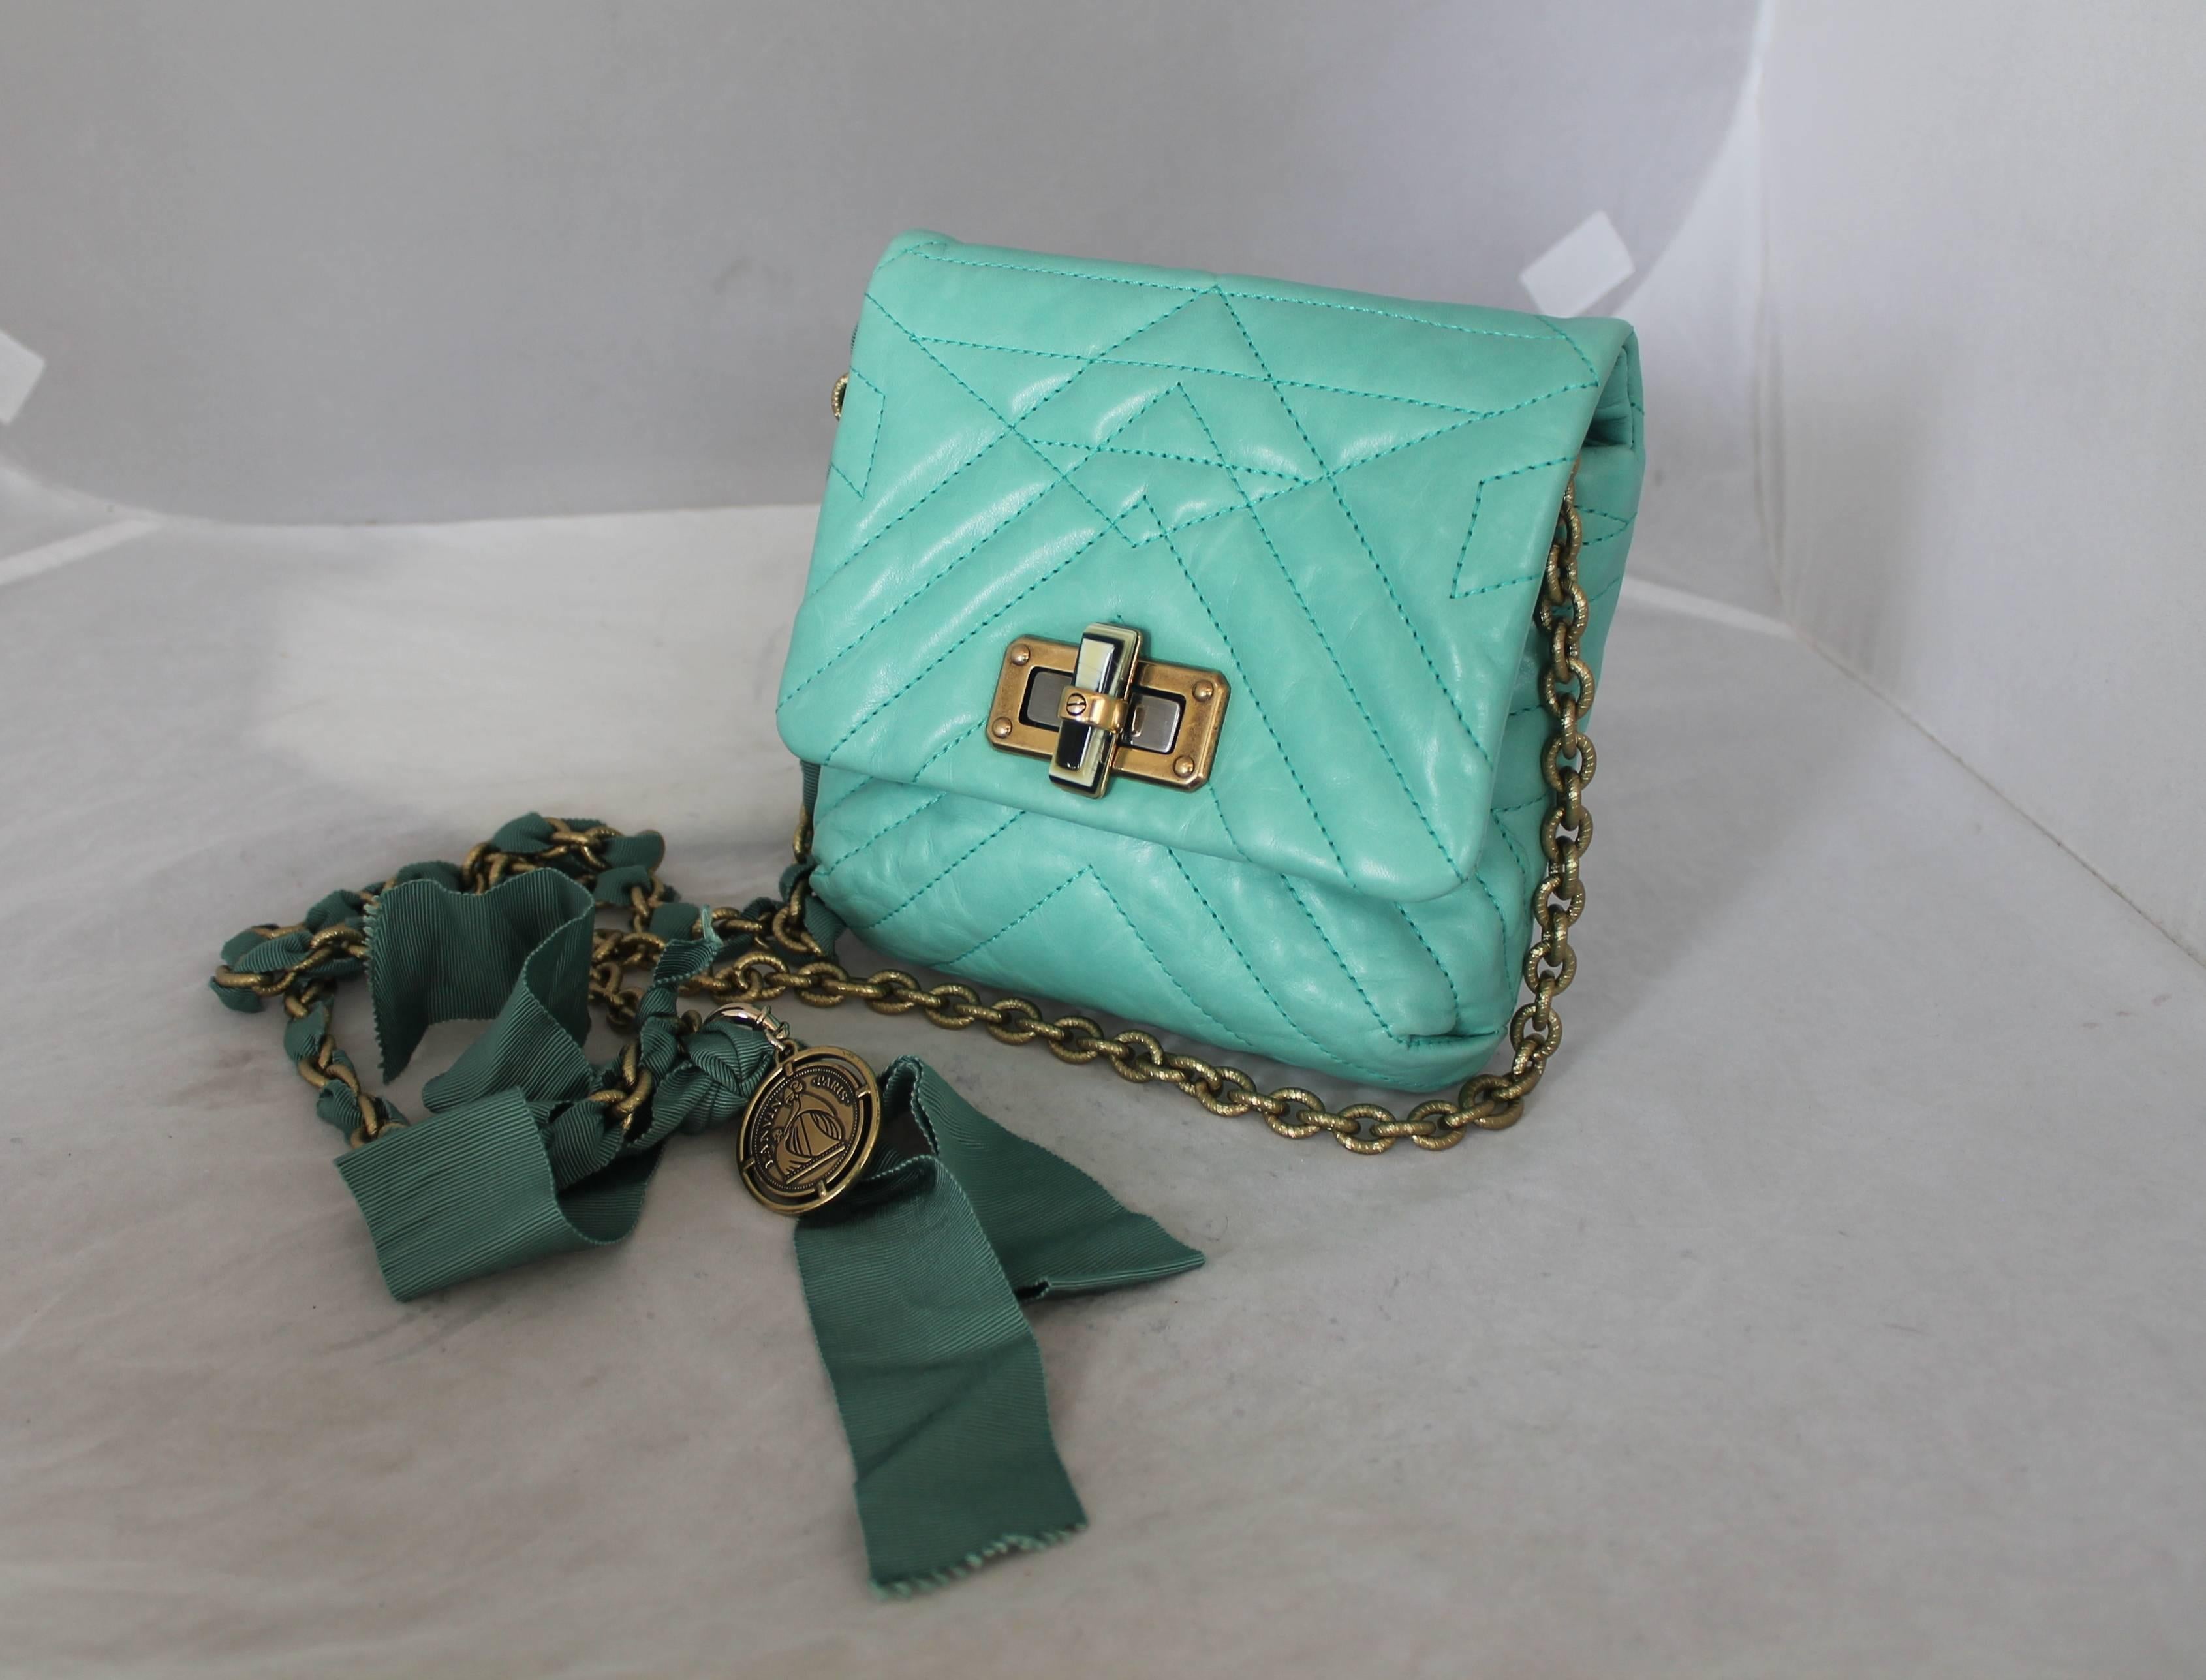 Lanvin Aqua Happy Mini Pop Crossbody Handbag - GHW. This bag is in very good condition with light wear with the only slight issue being on the inside of the bag on the leather as seen in image 3. The chain is a dull gold that is etched and is woven